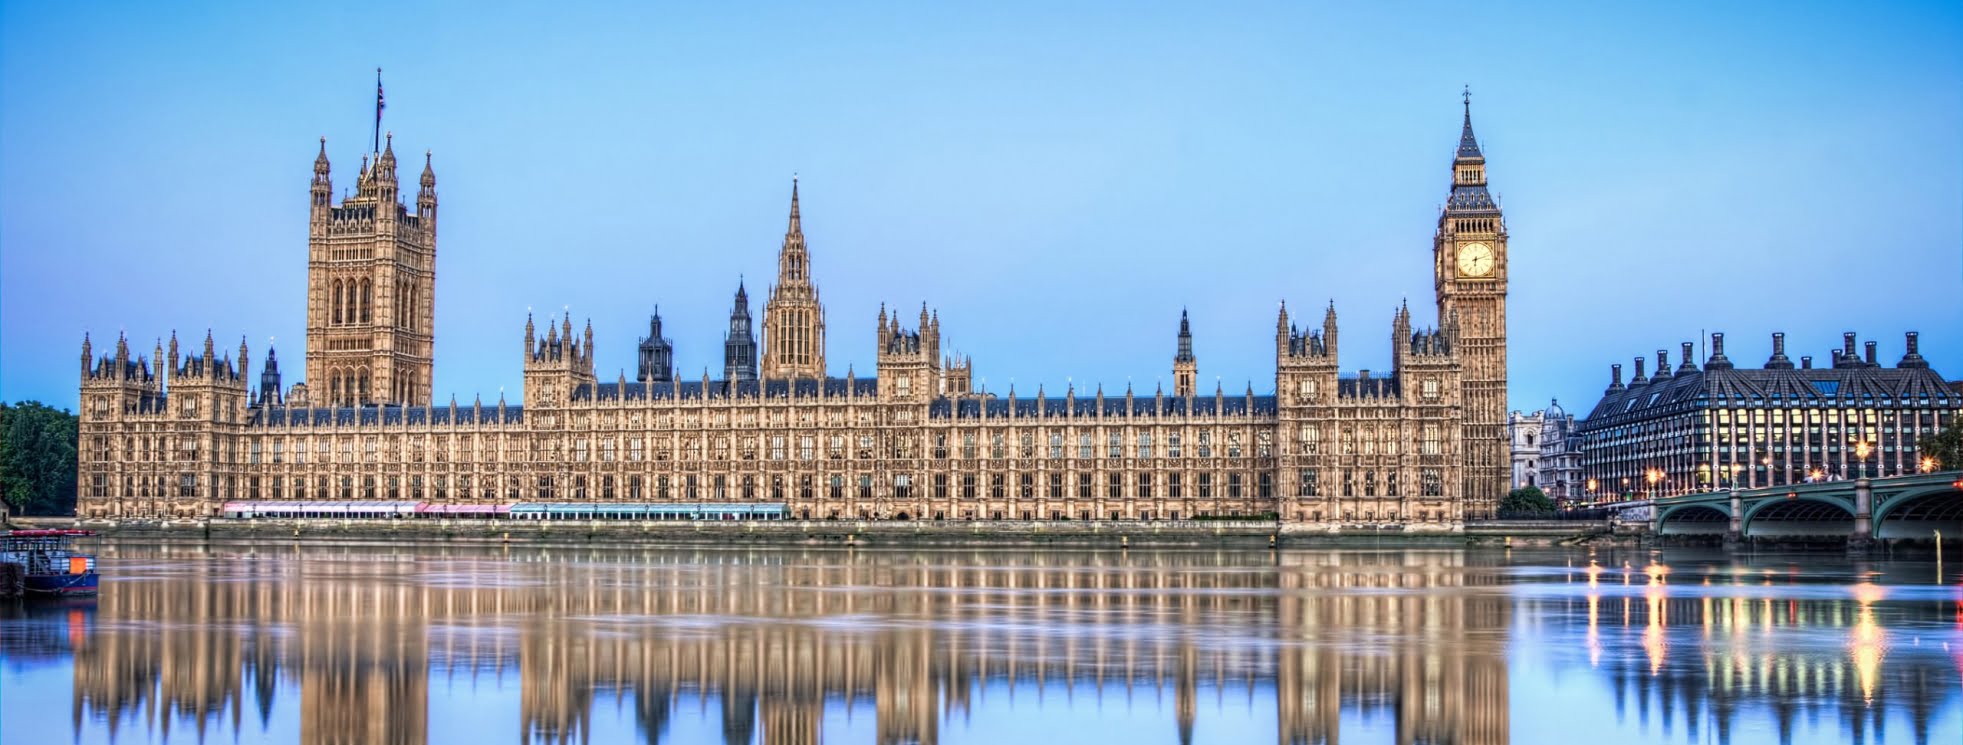 Parliament image to represent public affairs work from Principle consulting